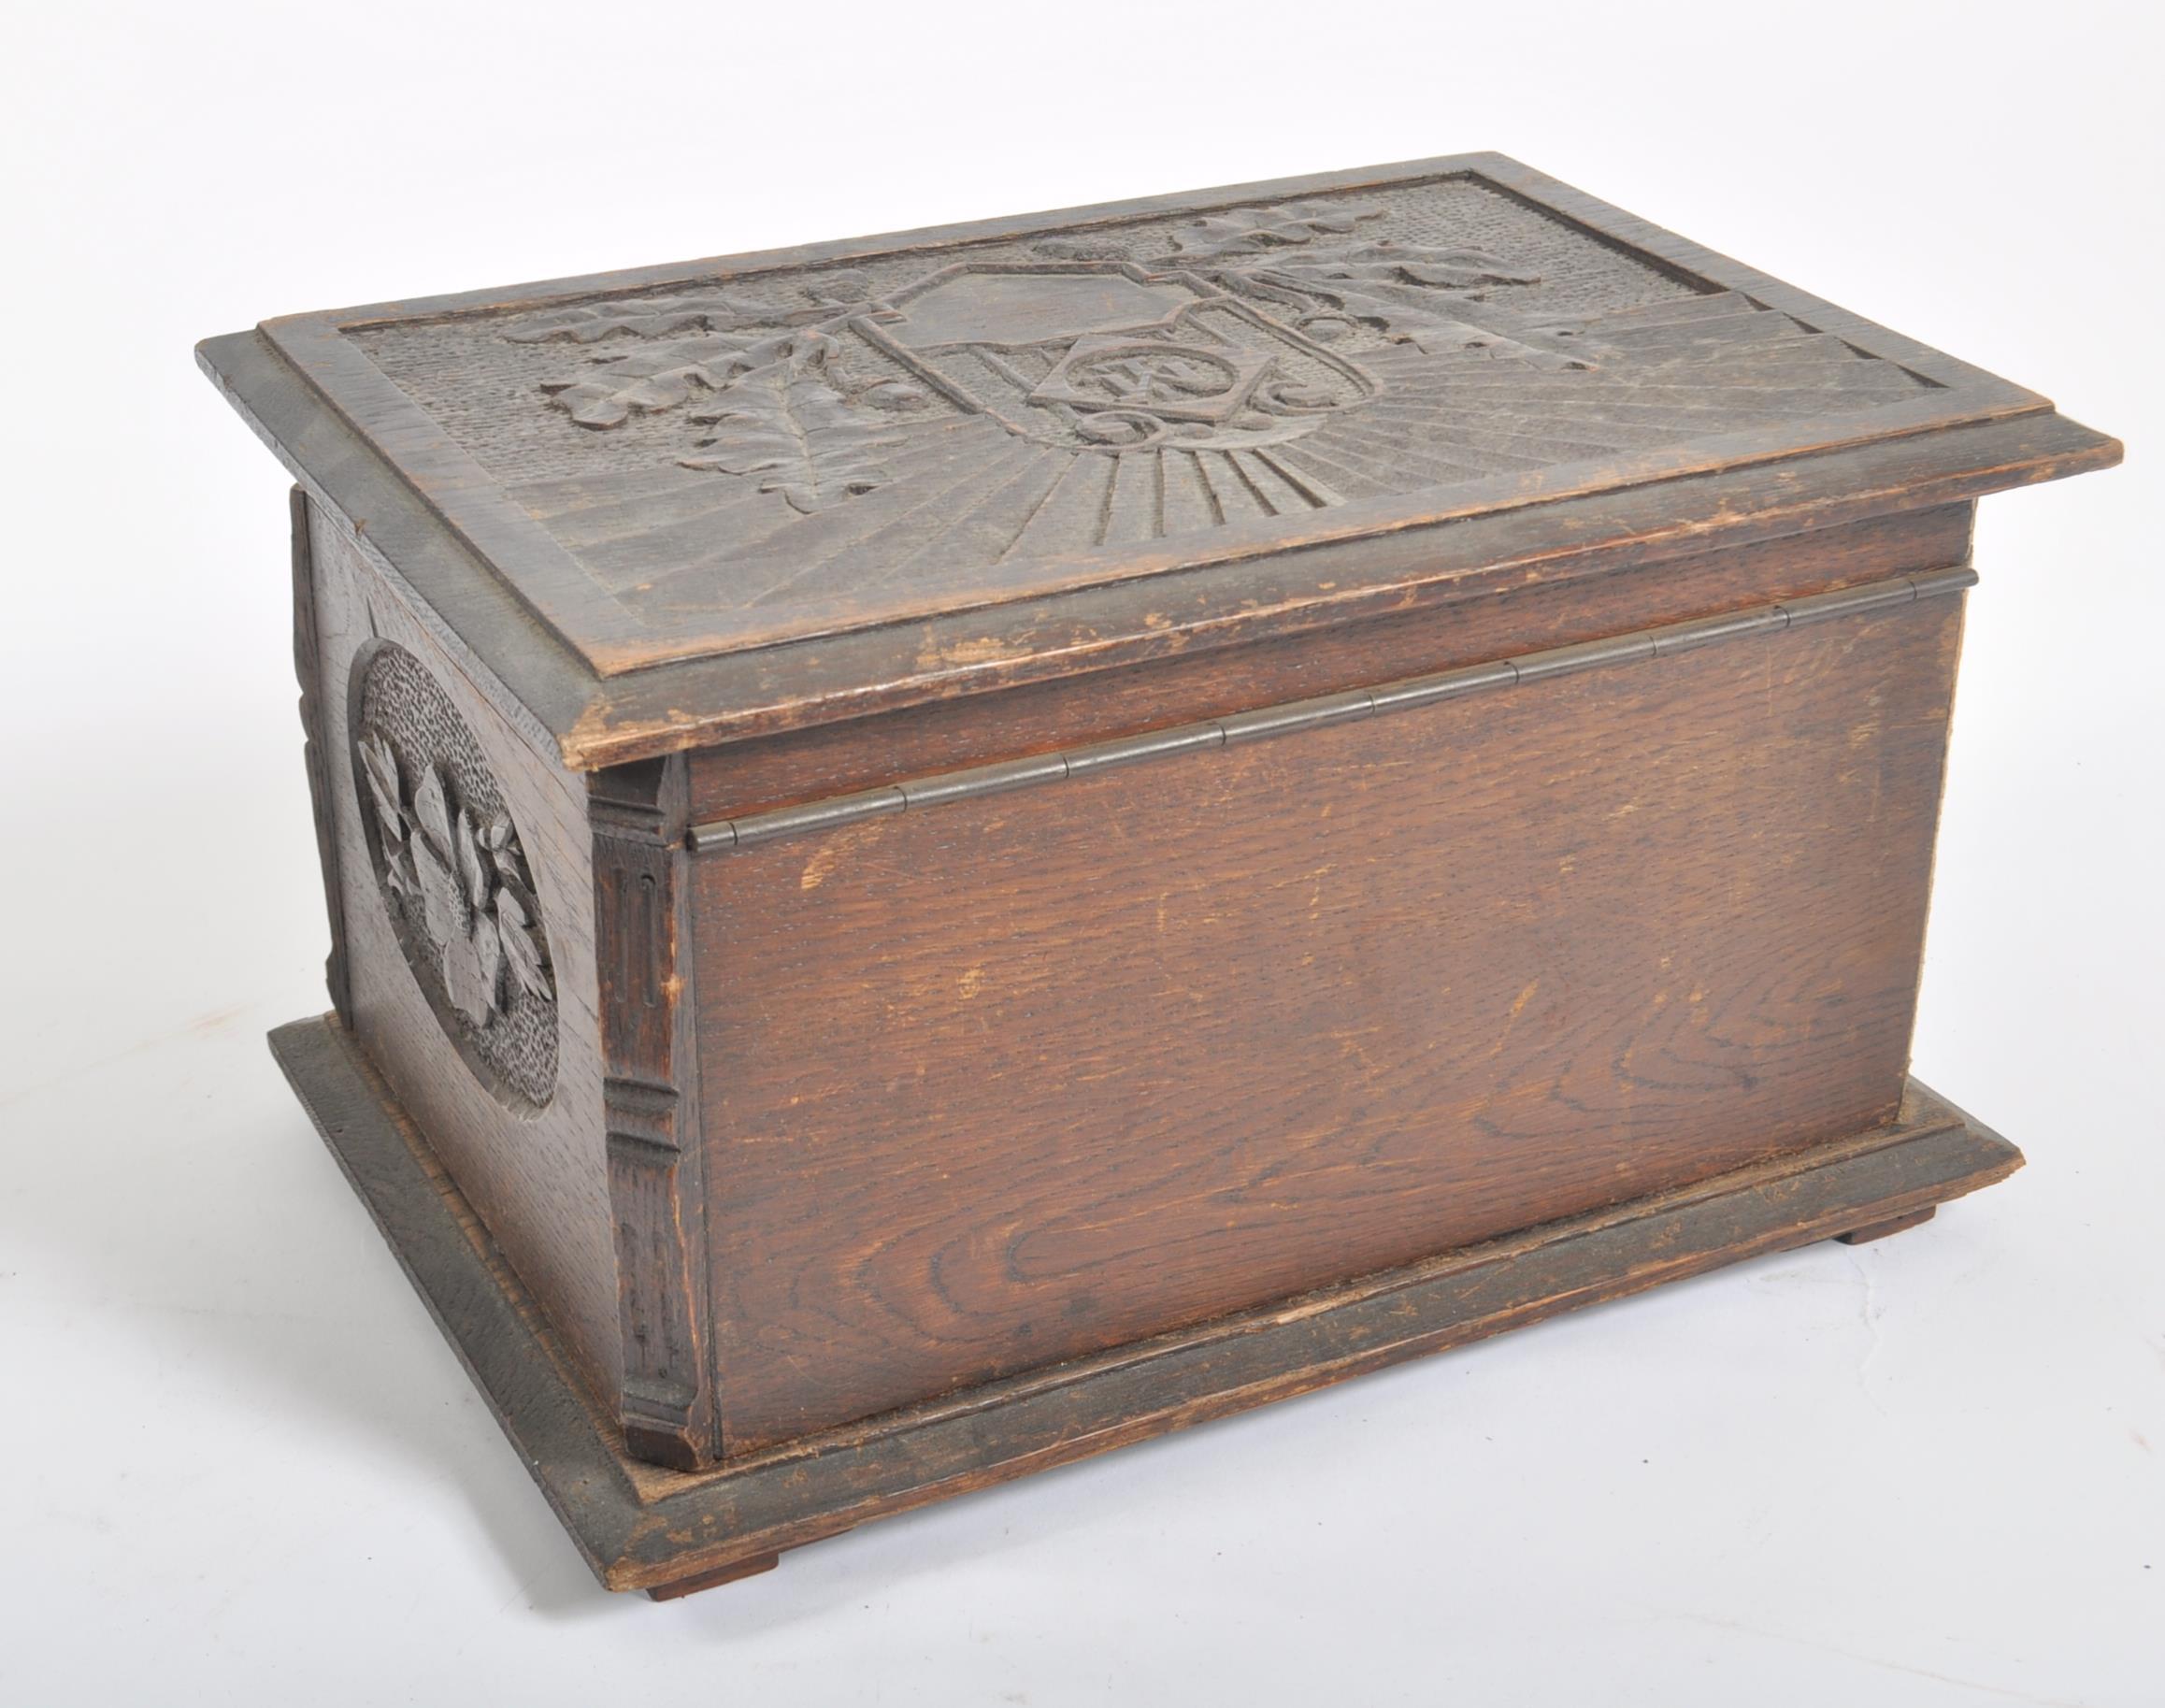 WWII SECOND WORLD WAR CARVED OAK SMALL WOODEN CHEST - Image 9 of 9